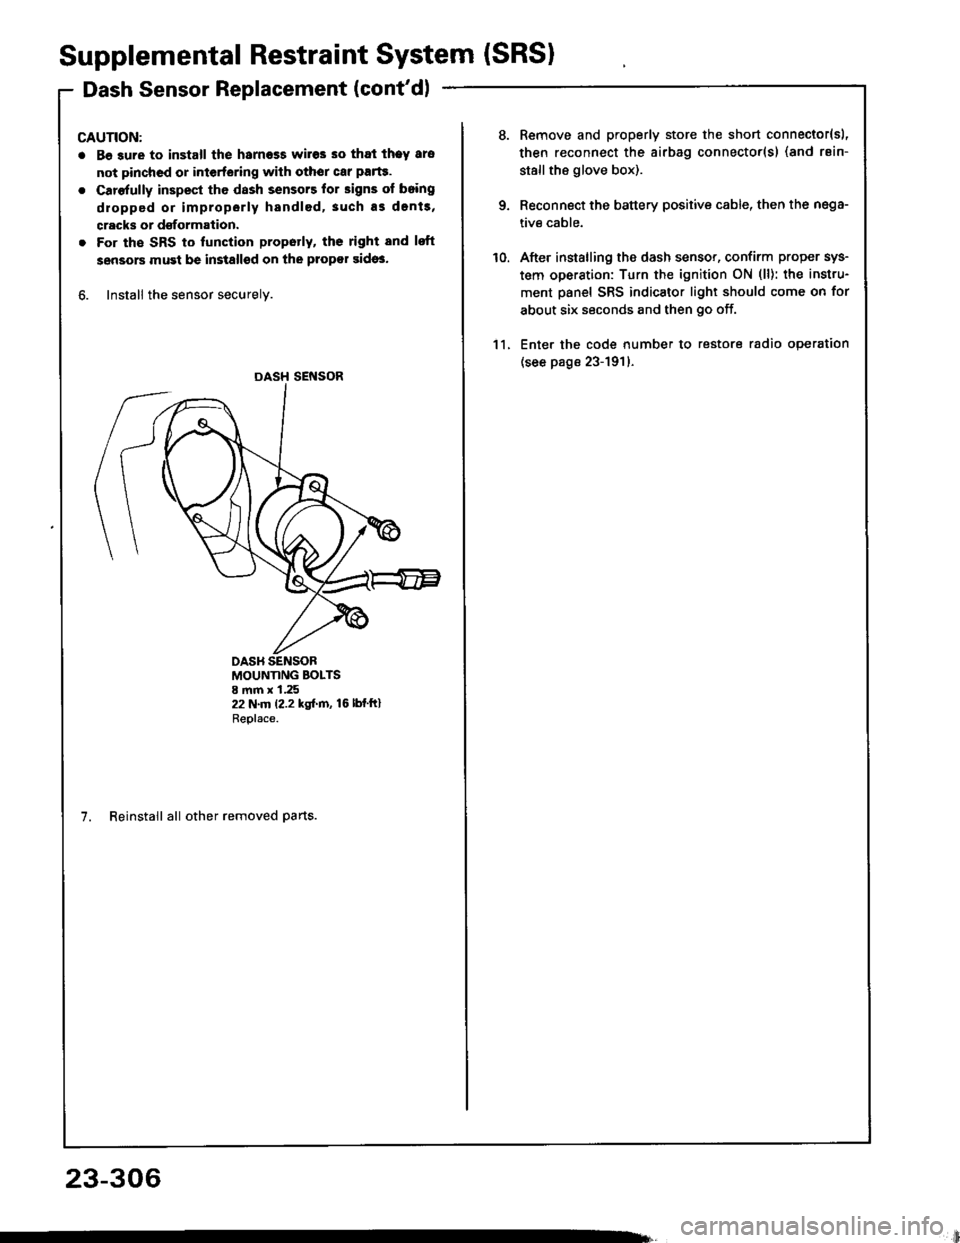 HONDA INTEGRA 1994 4.G Repair Manual Supplemental Restraint System (SRSI
Dash Sensor Replacement (contdl
CAUTION:
. Be 3ure to install the harness wires so that theY ars
not pinchcd or interfering with othor car parte.
o Carefully inspe